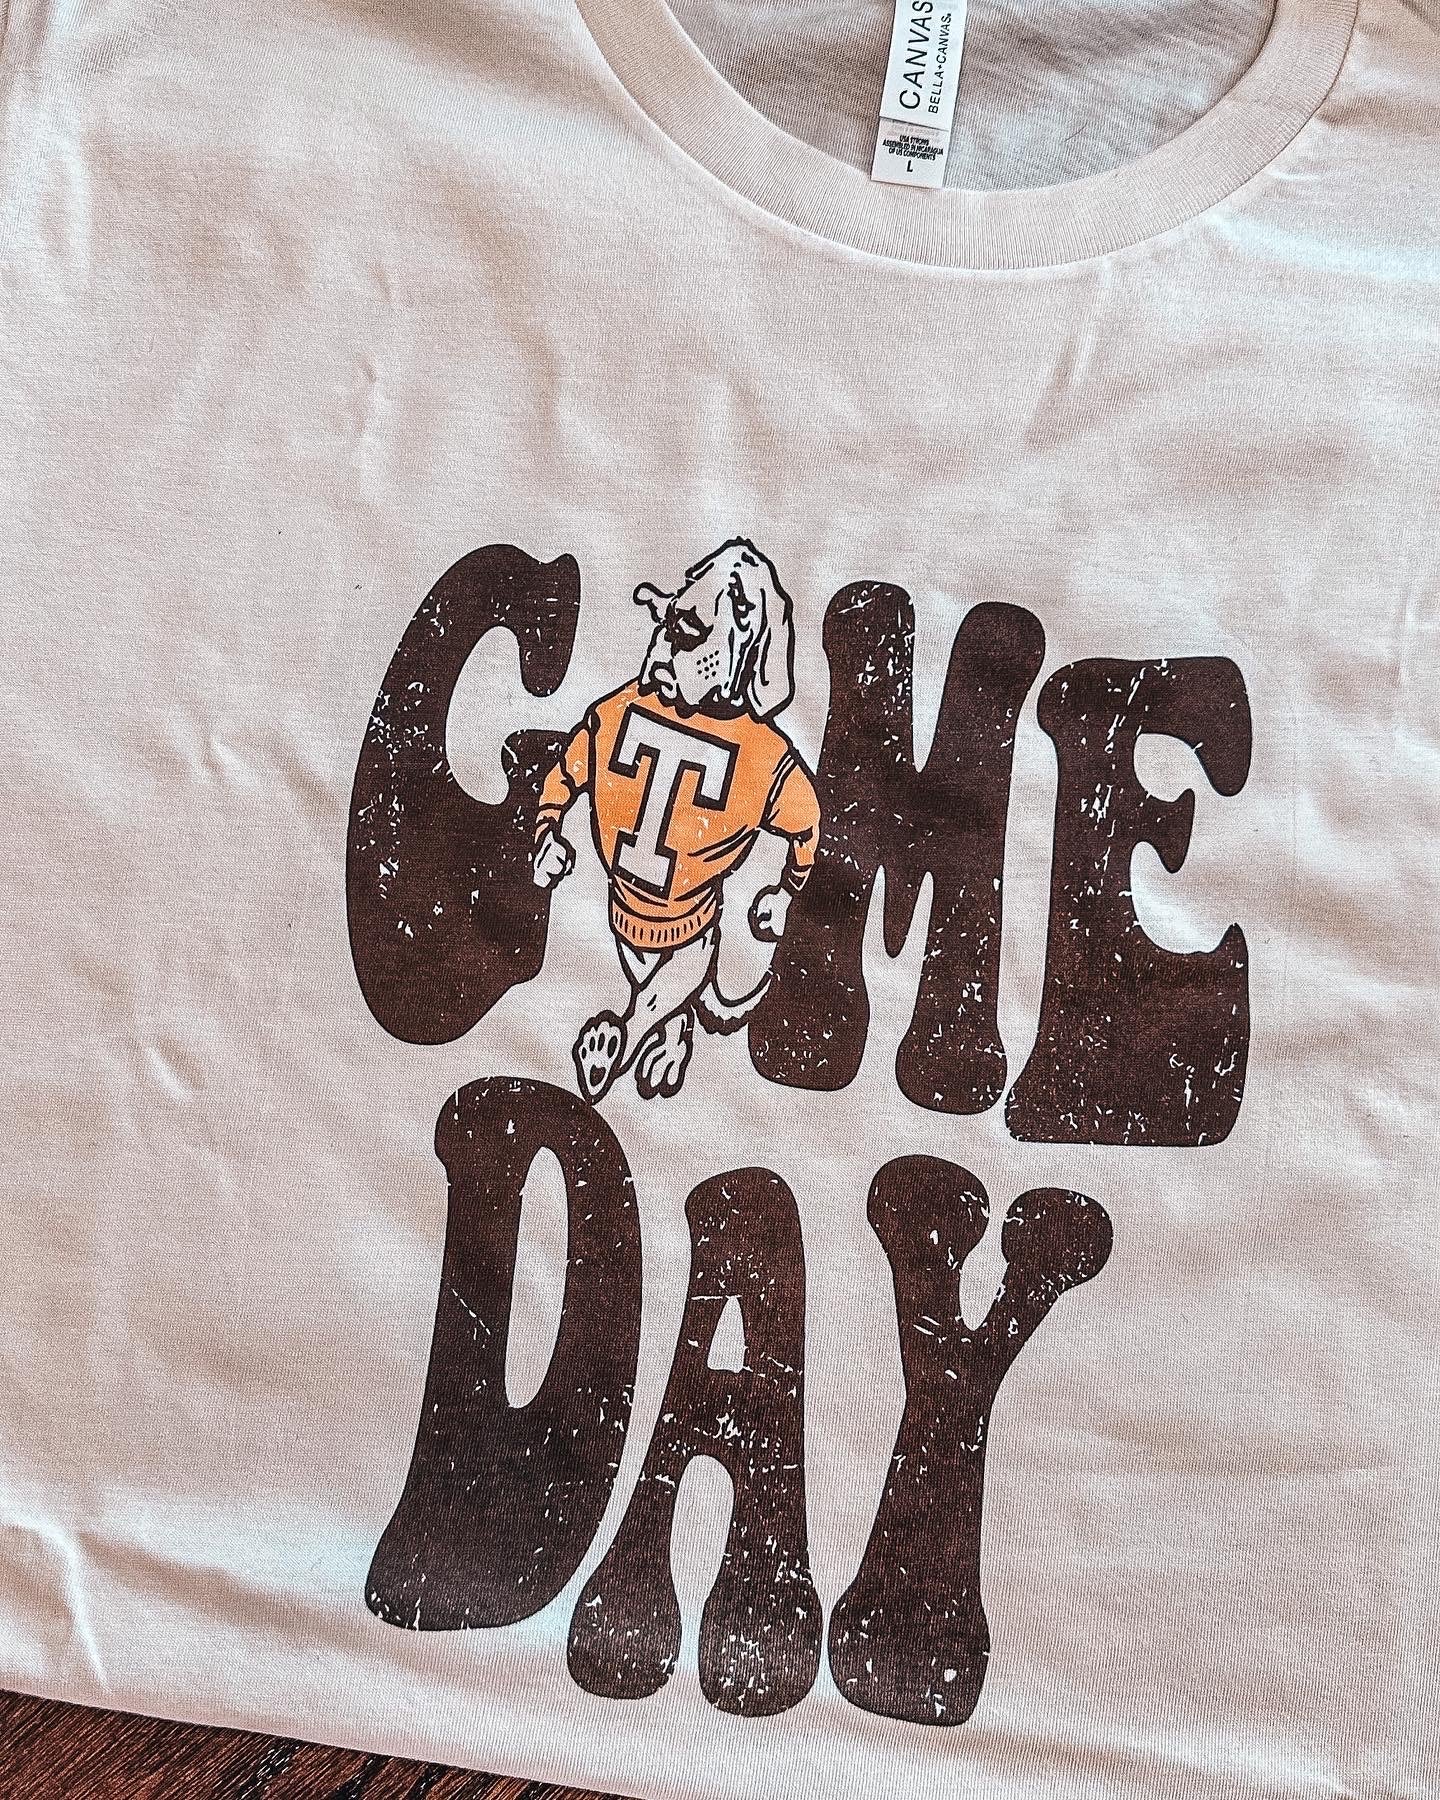 Game Day Tees